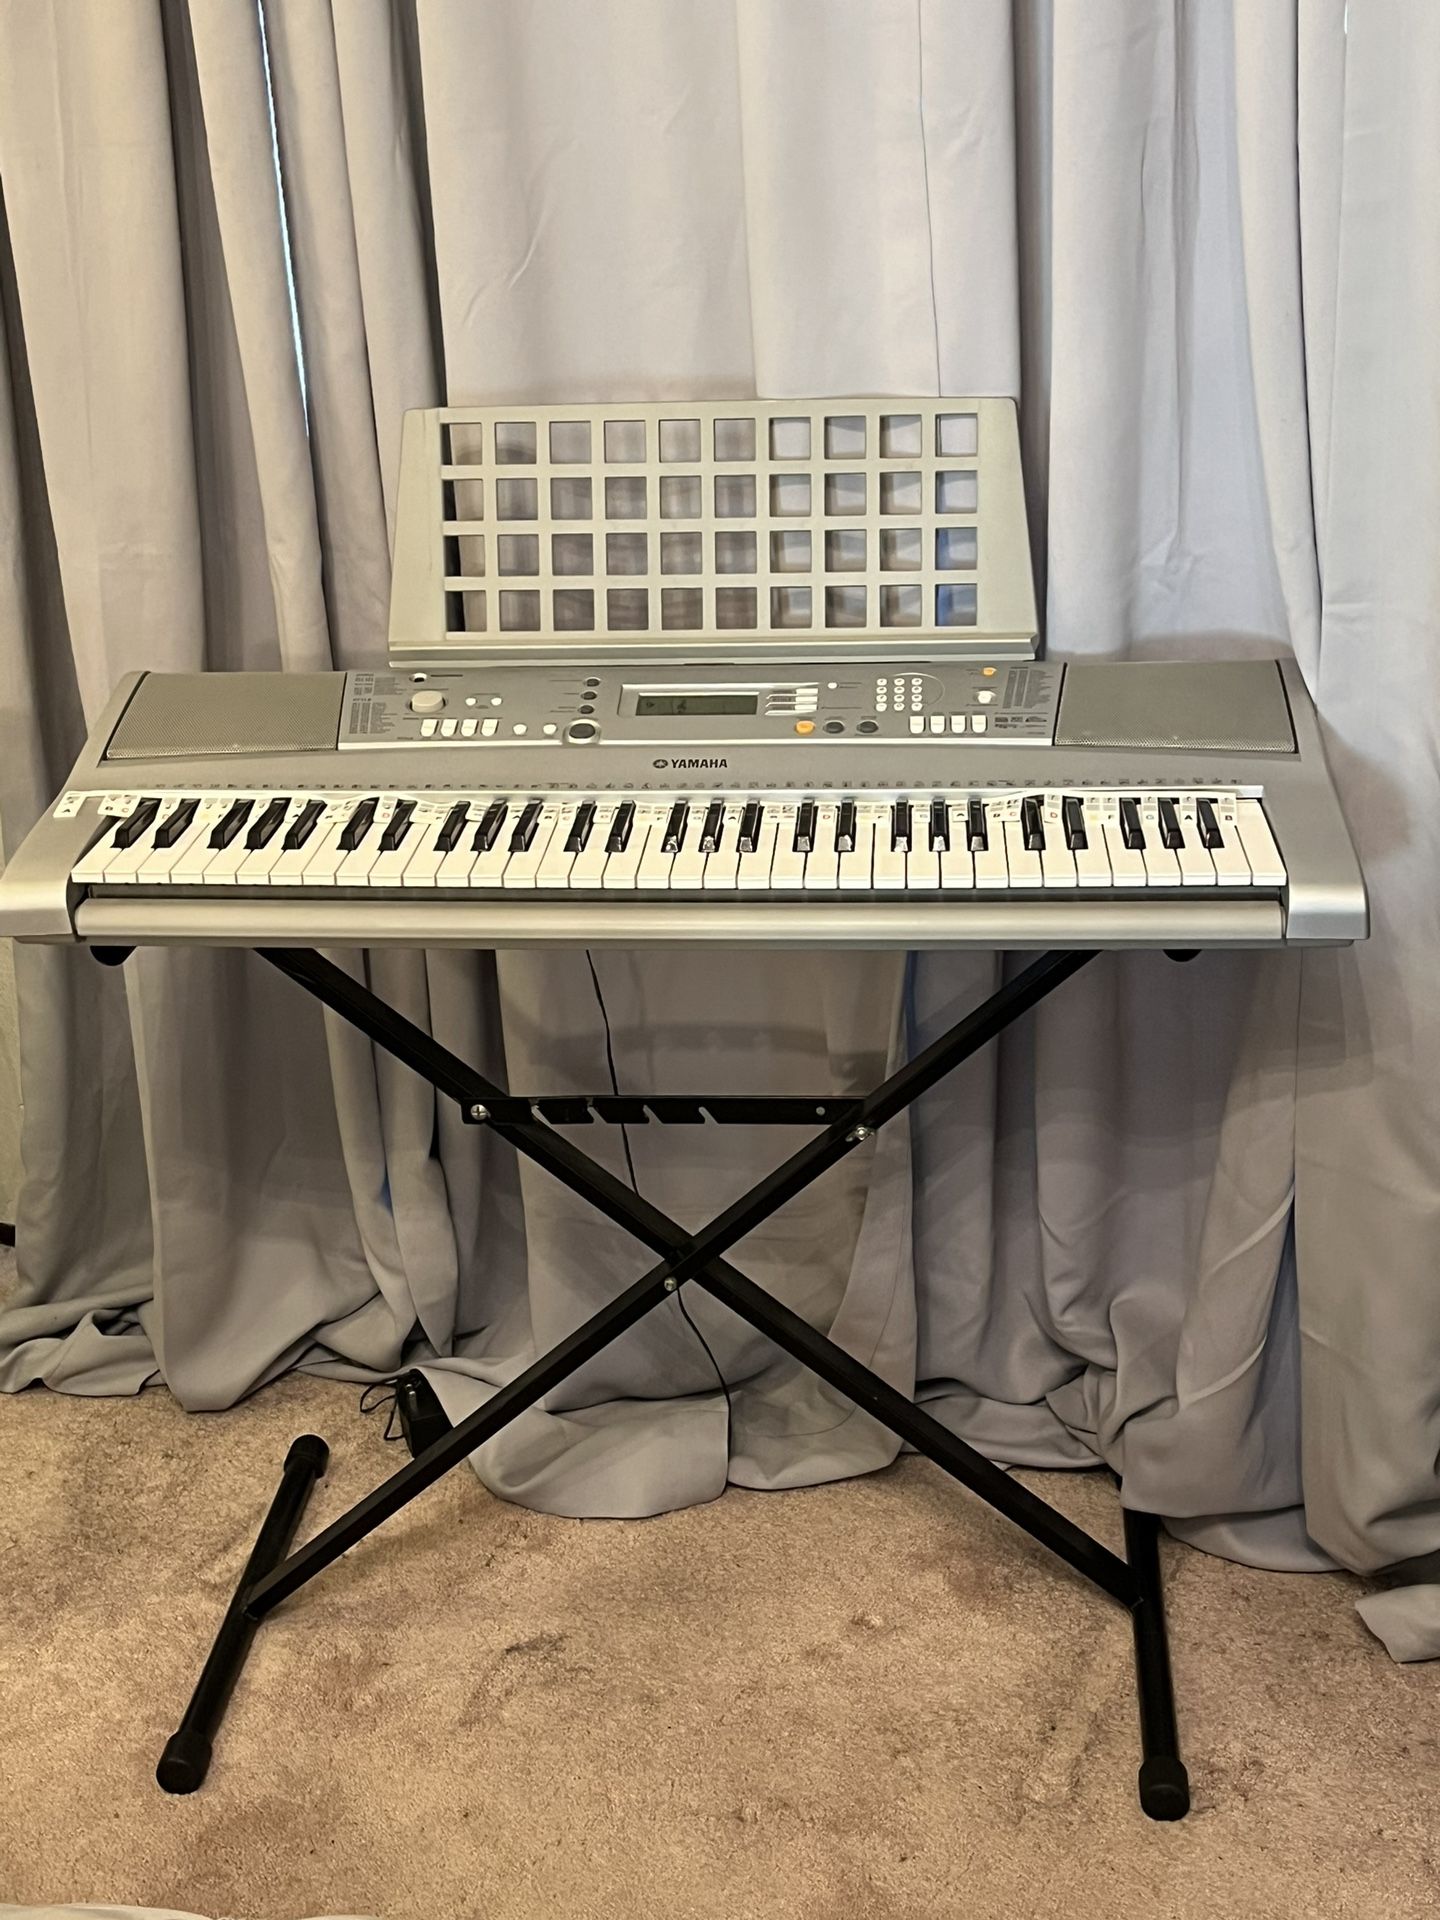 YAMAHA KEYBOARD - WORKS! THERE’S CORD FOR PLUGGING IN OR  BY BATTERY! Fun! P/U ONLY SF BAY AREA!